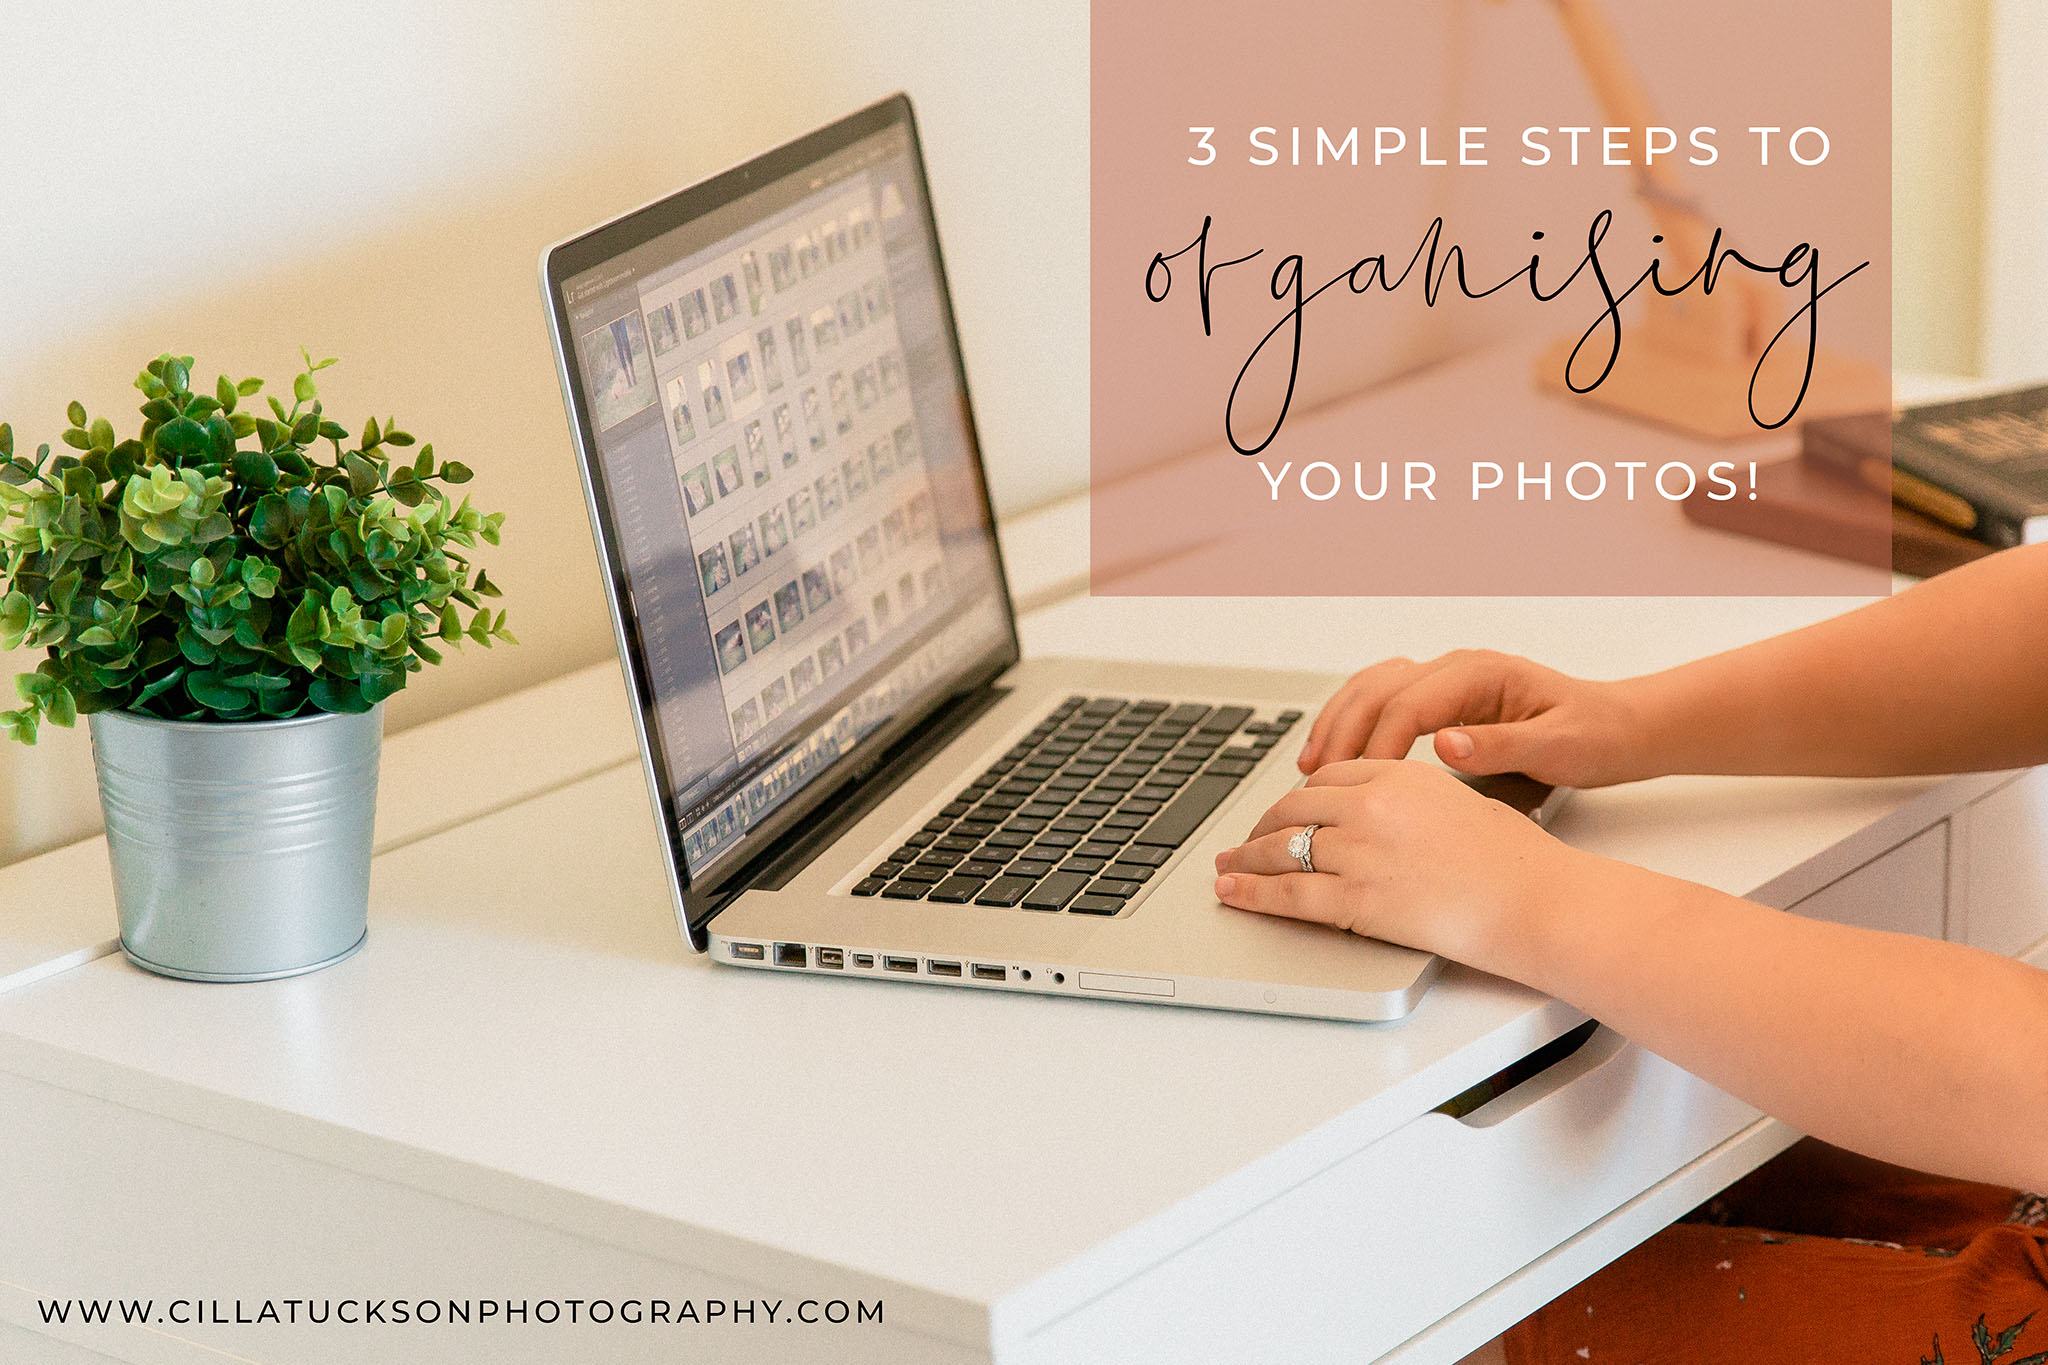 3 simple steps to organising your photos